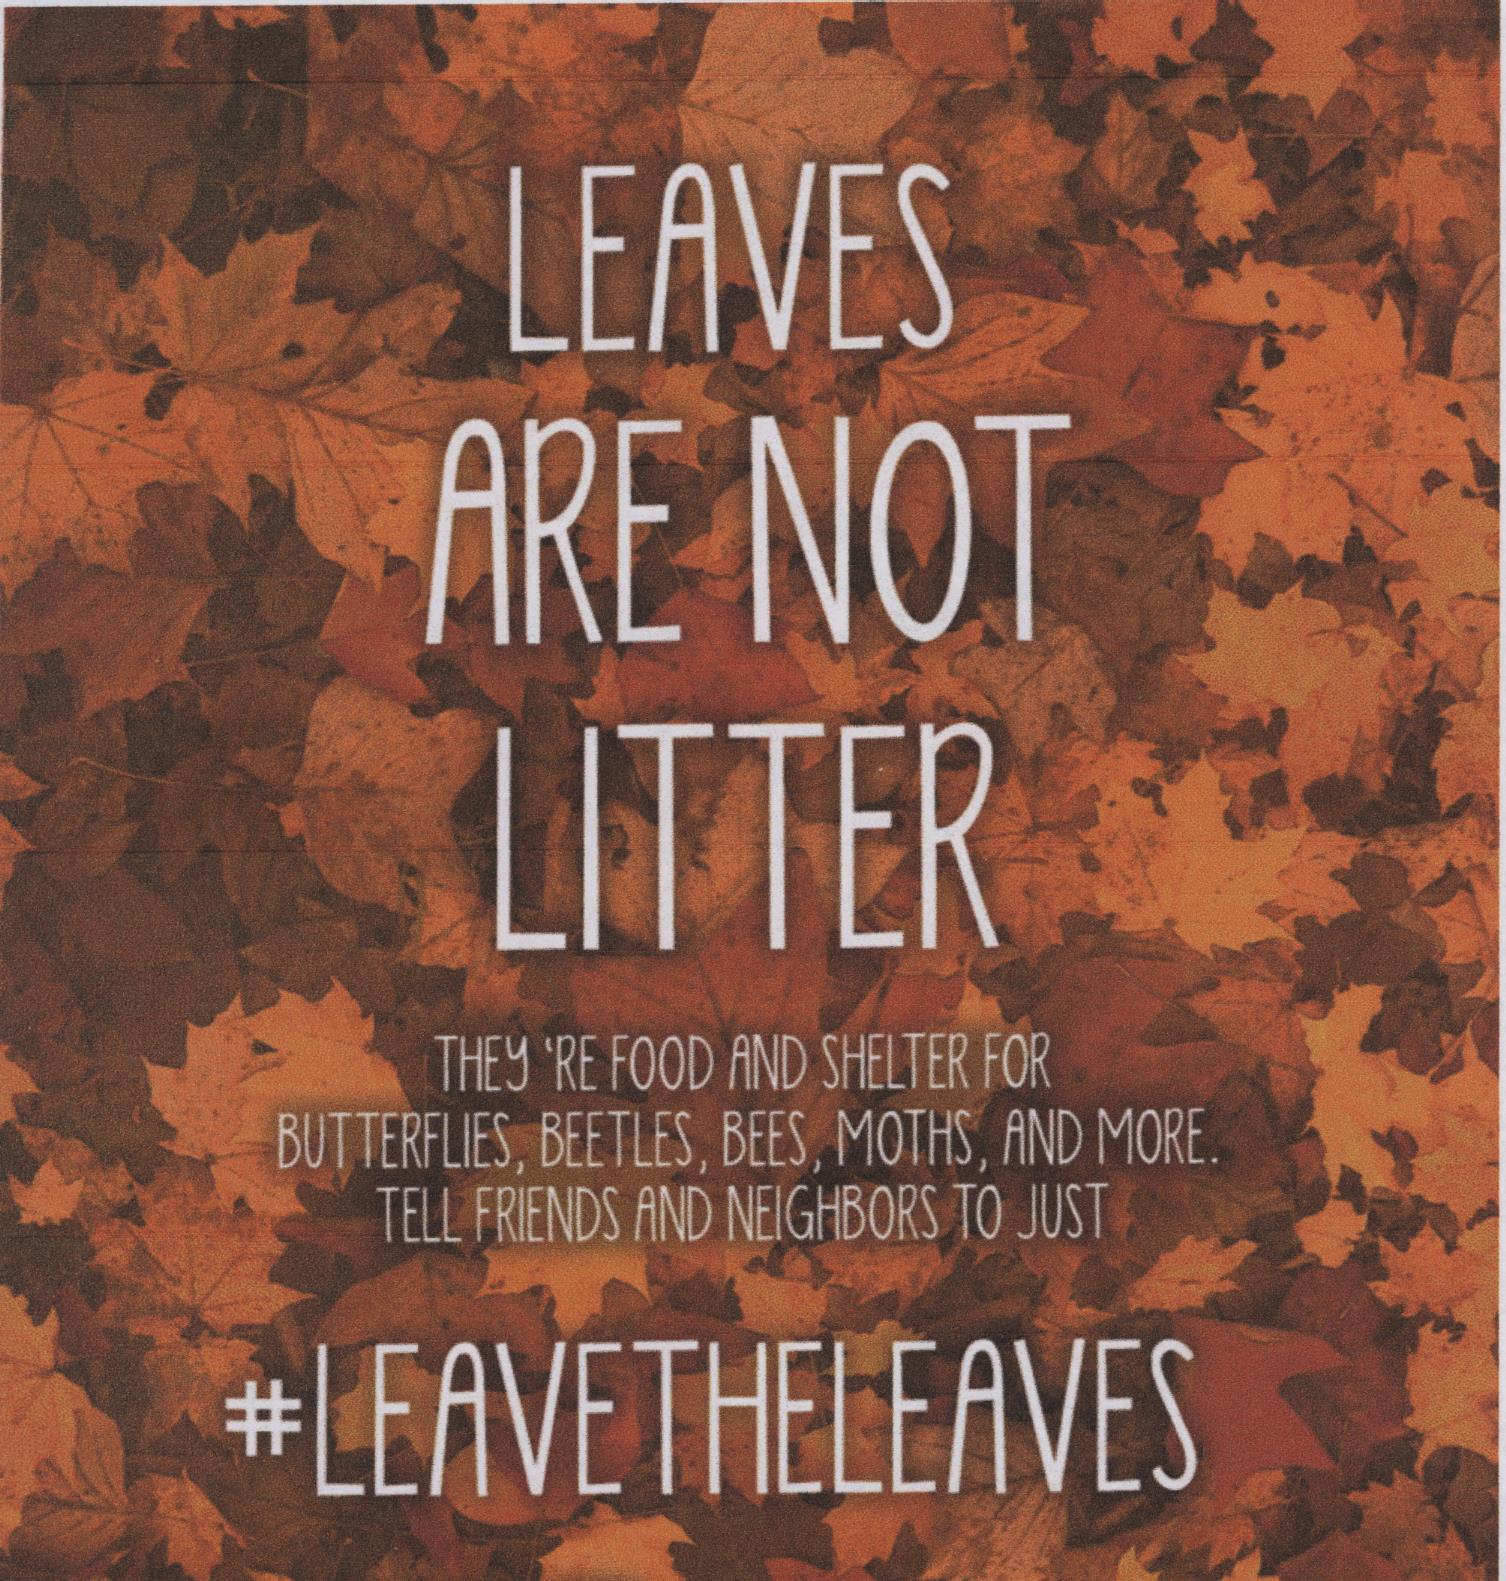 Flyer for "Leaves Are Not Litter" campaign.